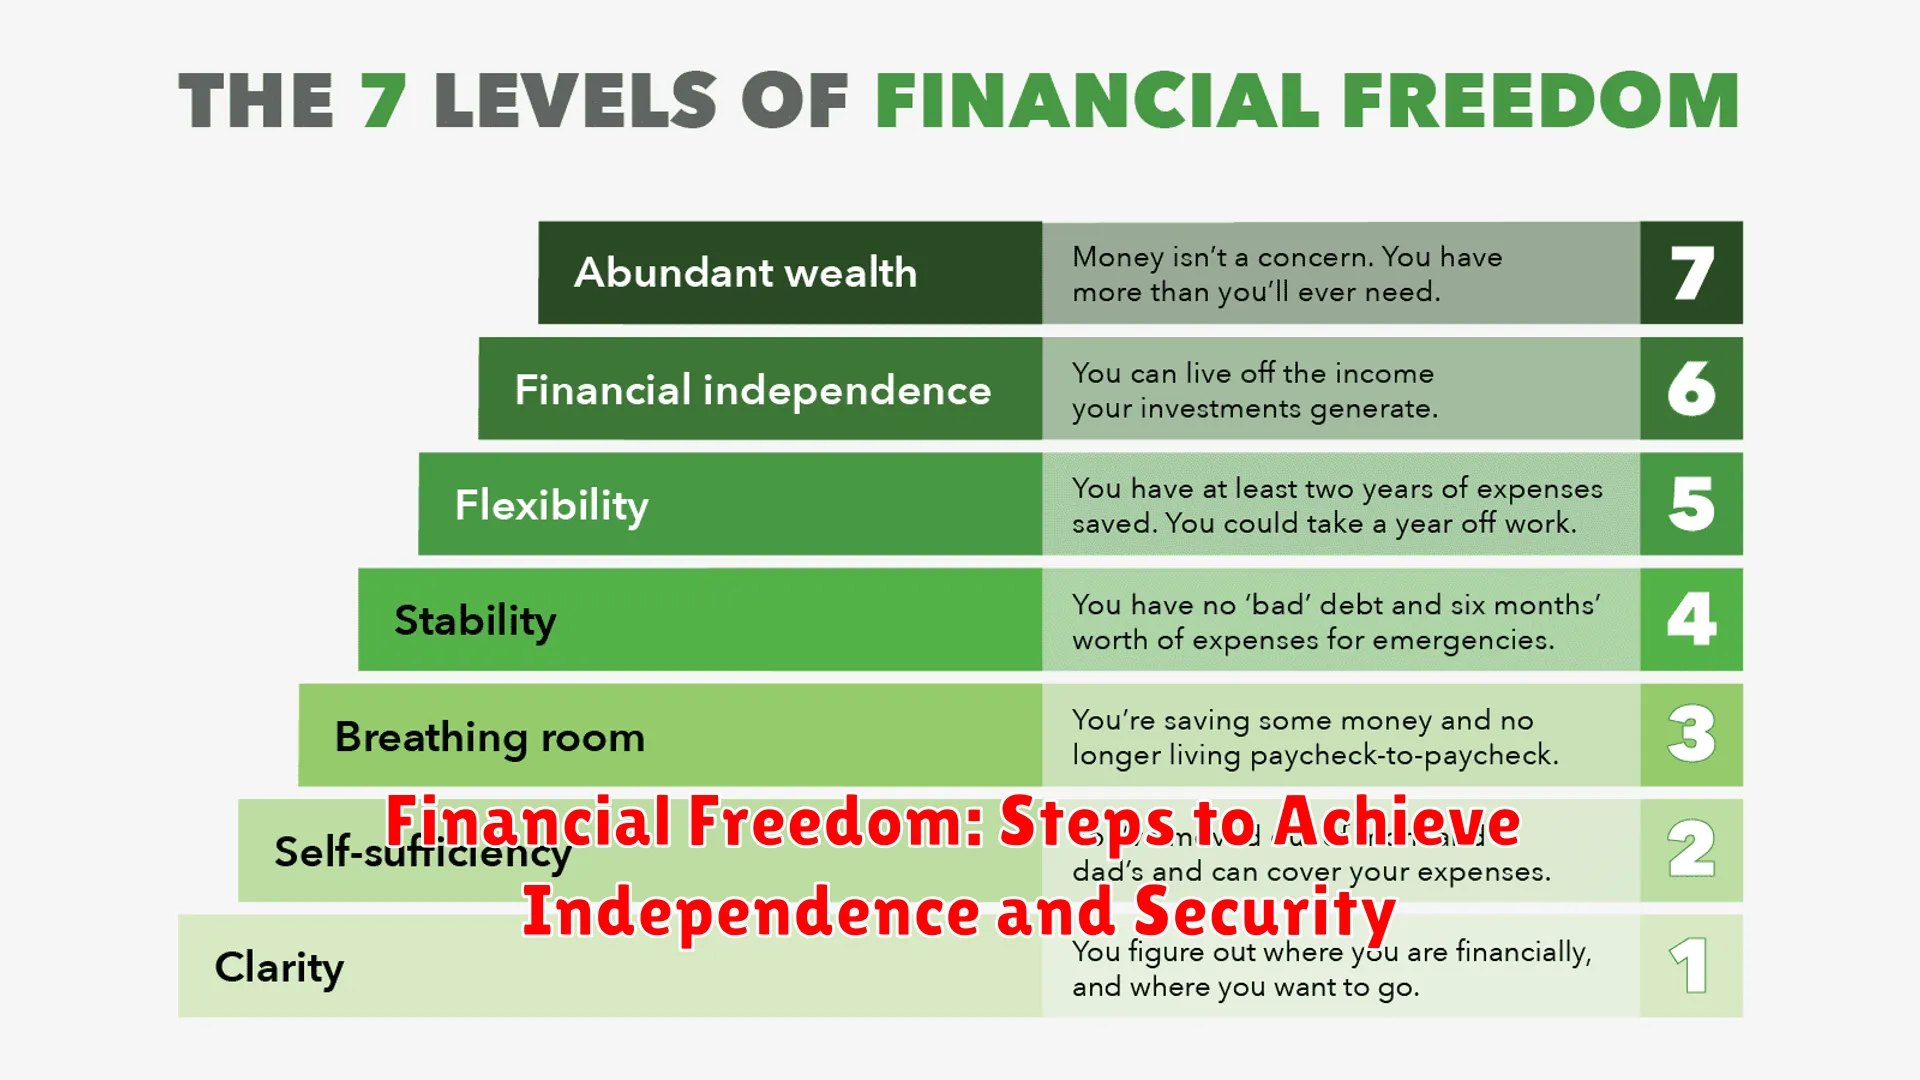 Financial Freedom: Steps to Achieve Independence and Security